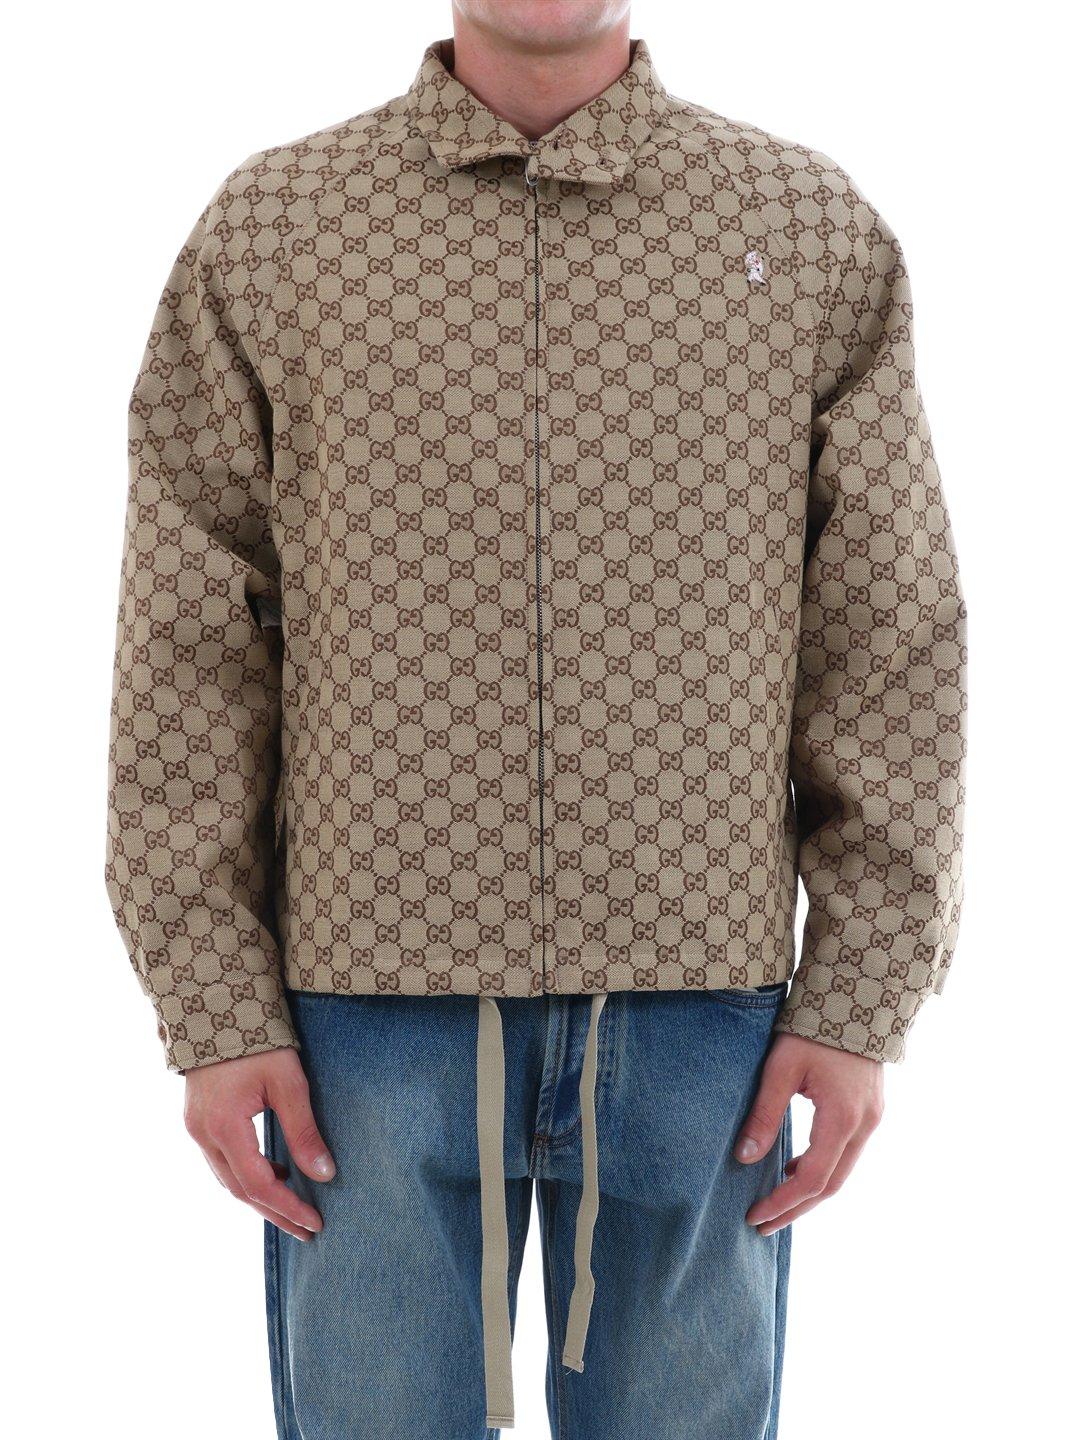 Gucci GG Canvas Zipped Bomber Jacket in Beige (Natural) for Men - Lyst